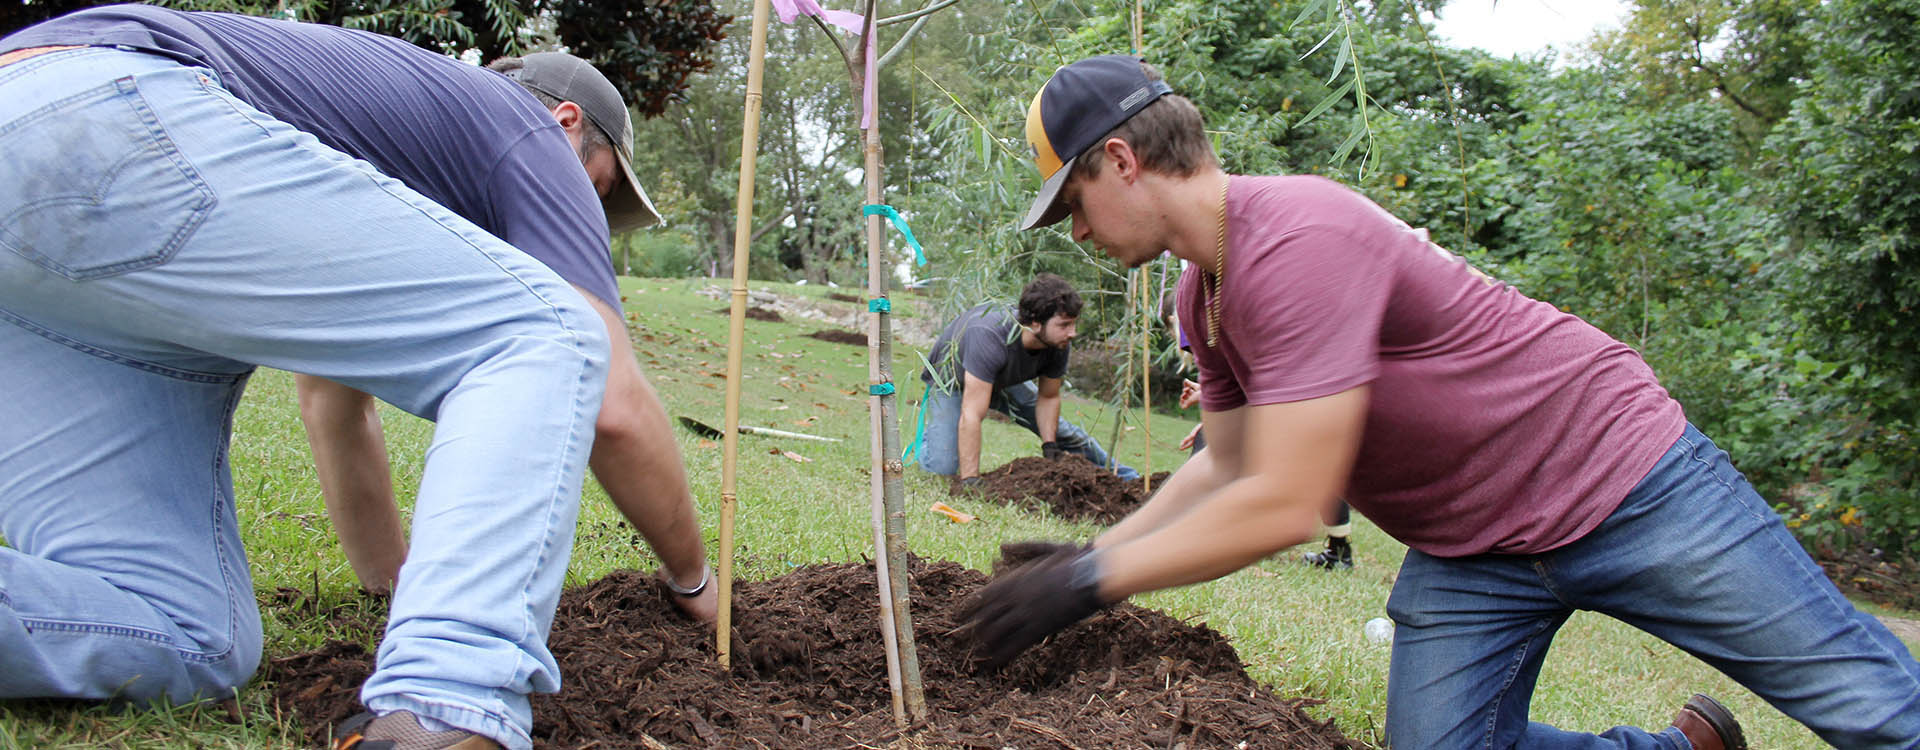 East Carolina University engineering students Adam Till, left, and Noah Weaver spread mulch around a willow tree they helped plant near Town Creek. (Photos by Ken Buday)